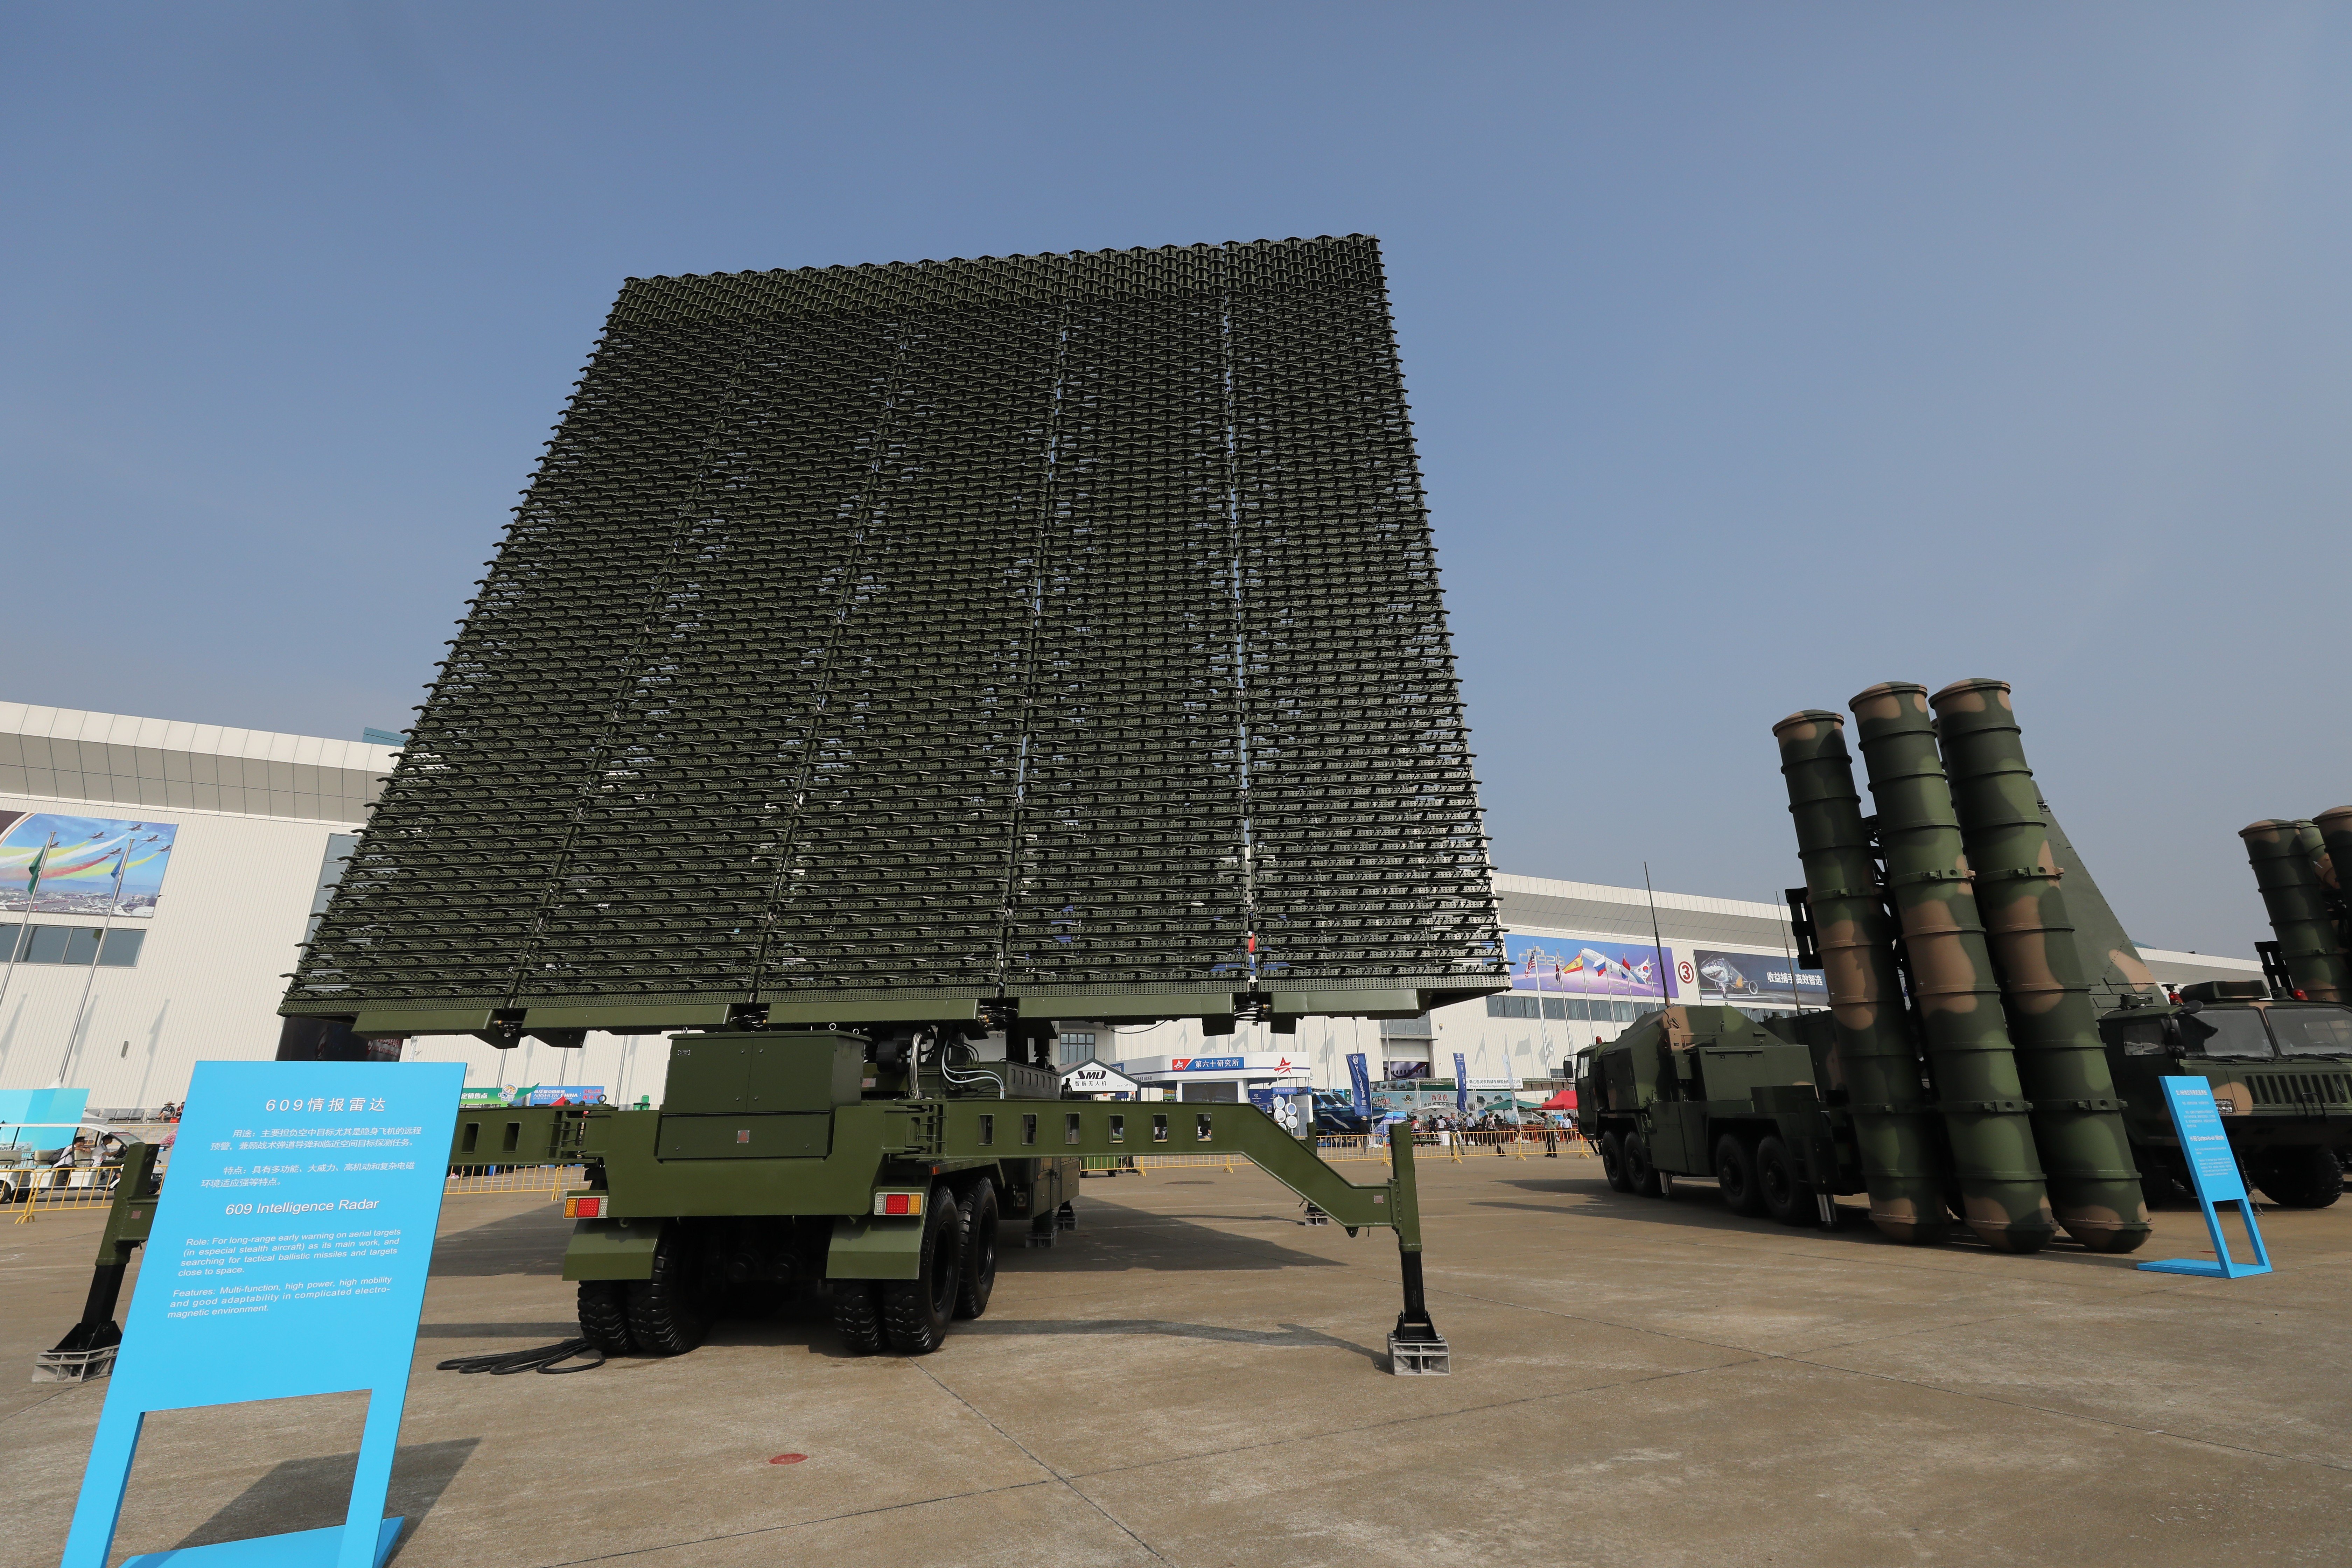 The 609 intelligence radar system on display at the Zhuhai air show. Photo: Dickson Lee